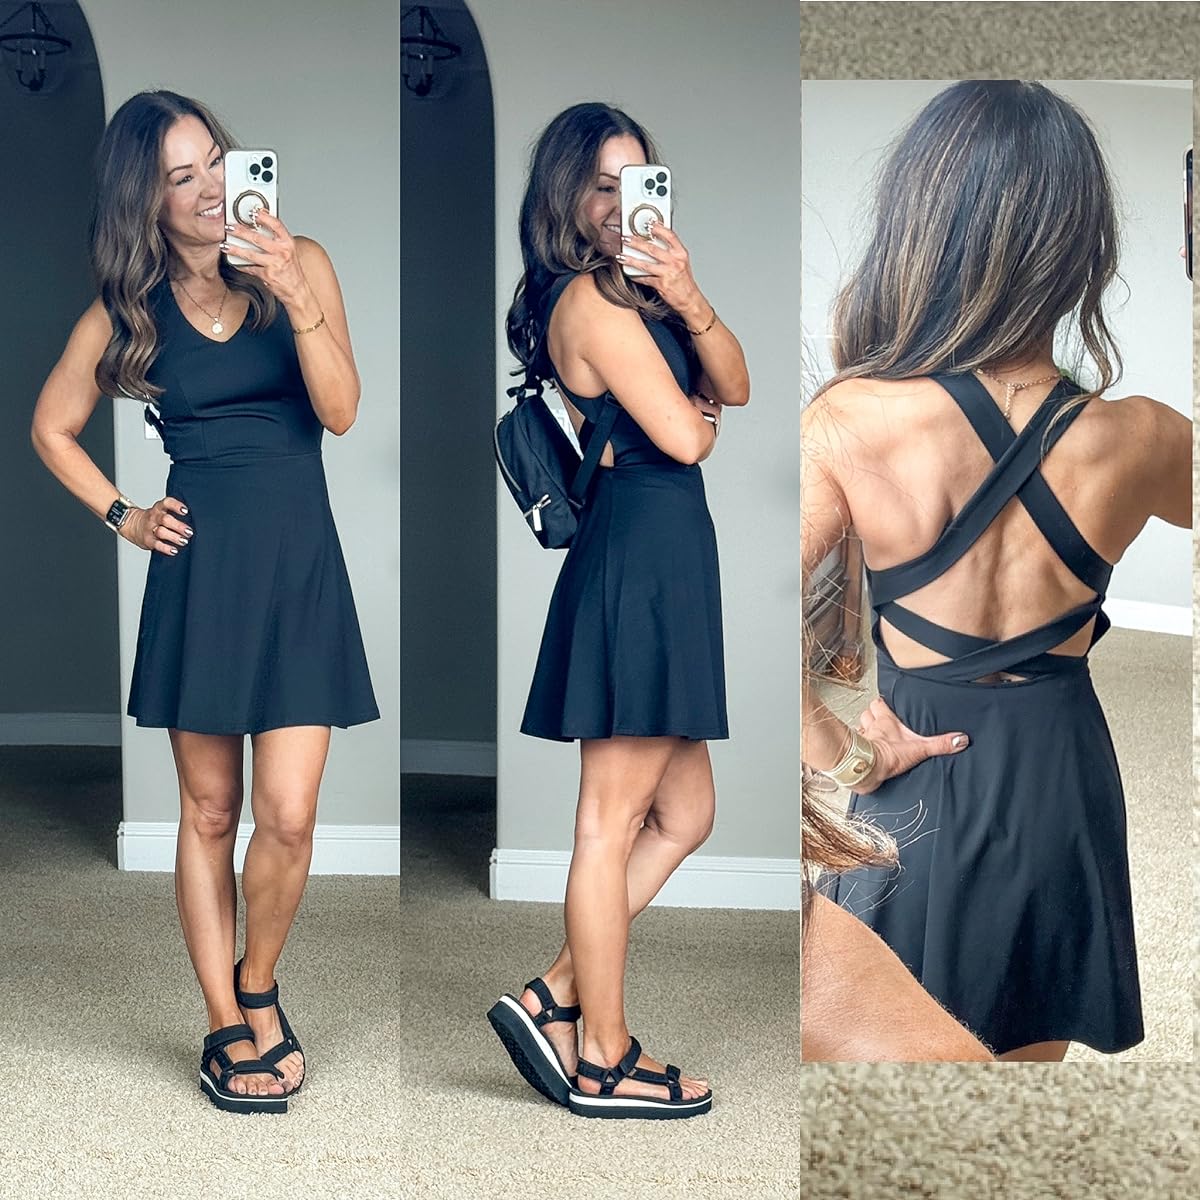 Top 10 hottest best sellers from may | best sellers, monthly top sellers, fashion, home, beauty, everyday fashion Amazon, tennis dress, pickleball outfit, theme park outfit, black dress, mini dress, sandals, summer outfit, everyday dress